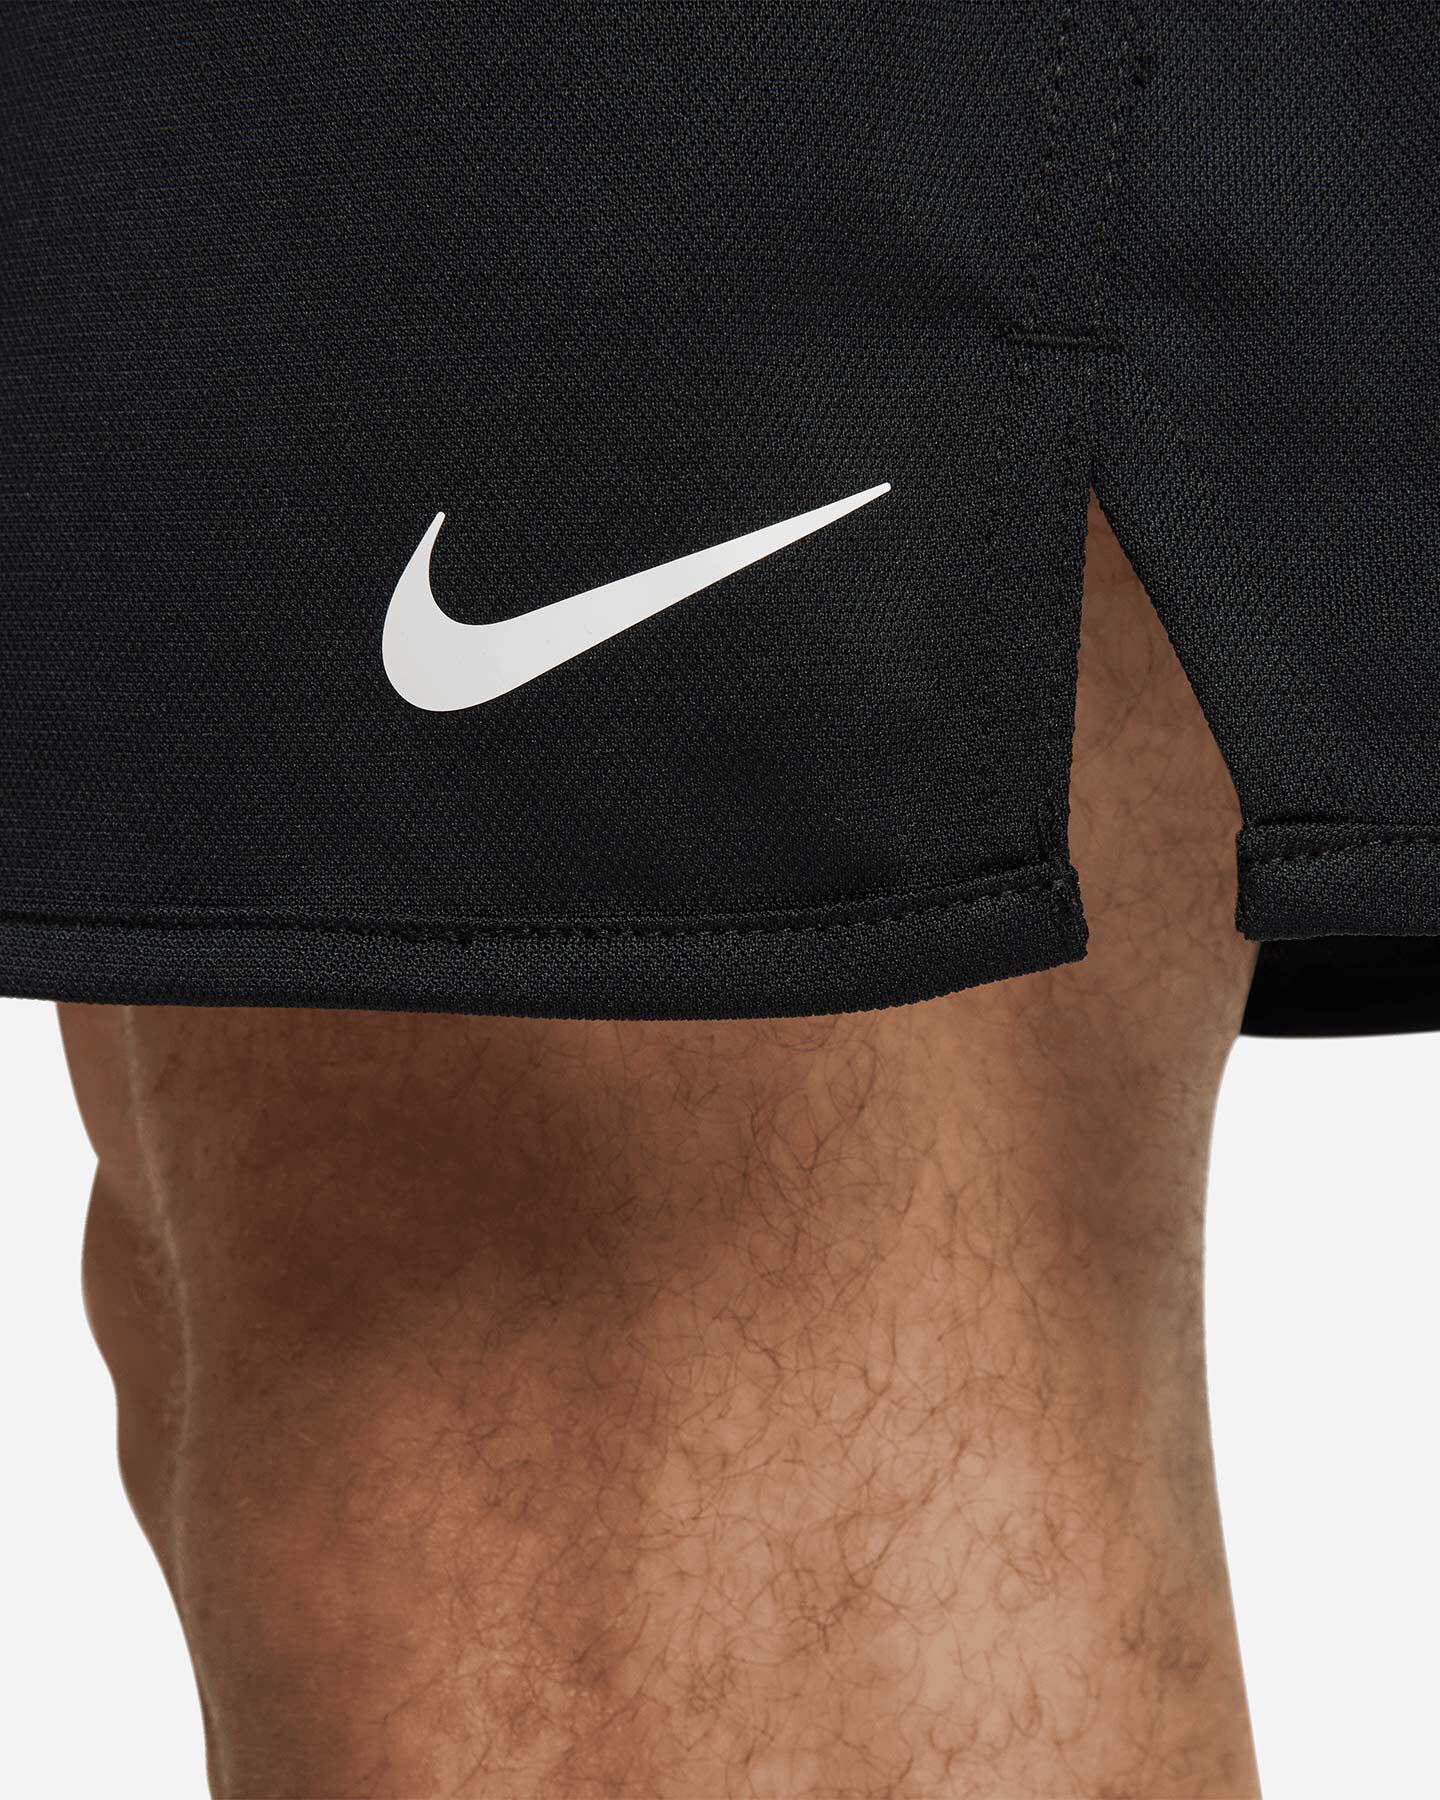  Pantalone training NIKE DRI FIT TOTALITY KNIT 7IN M S5539401 scatto 5